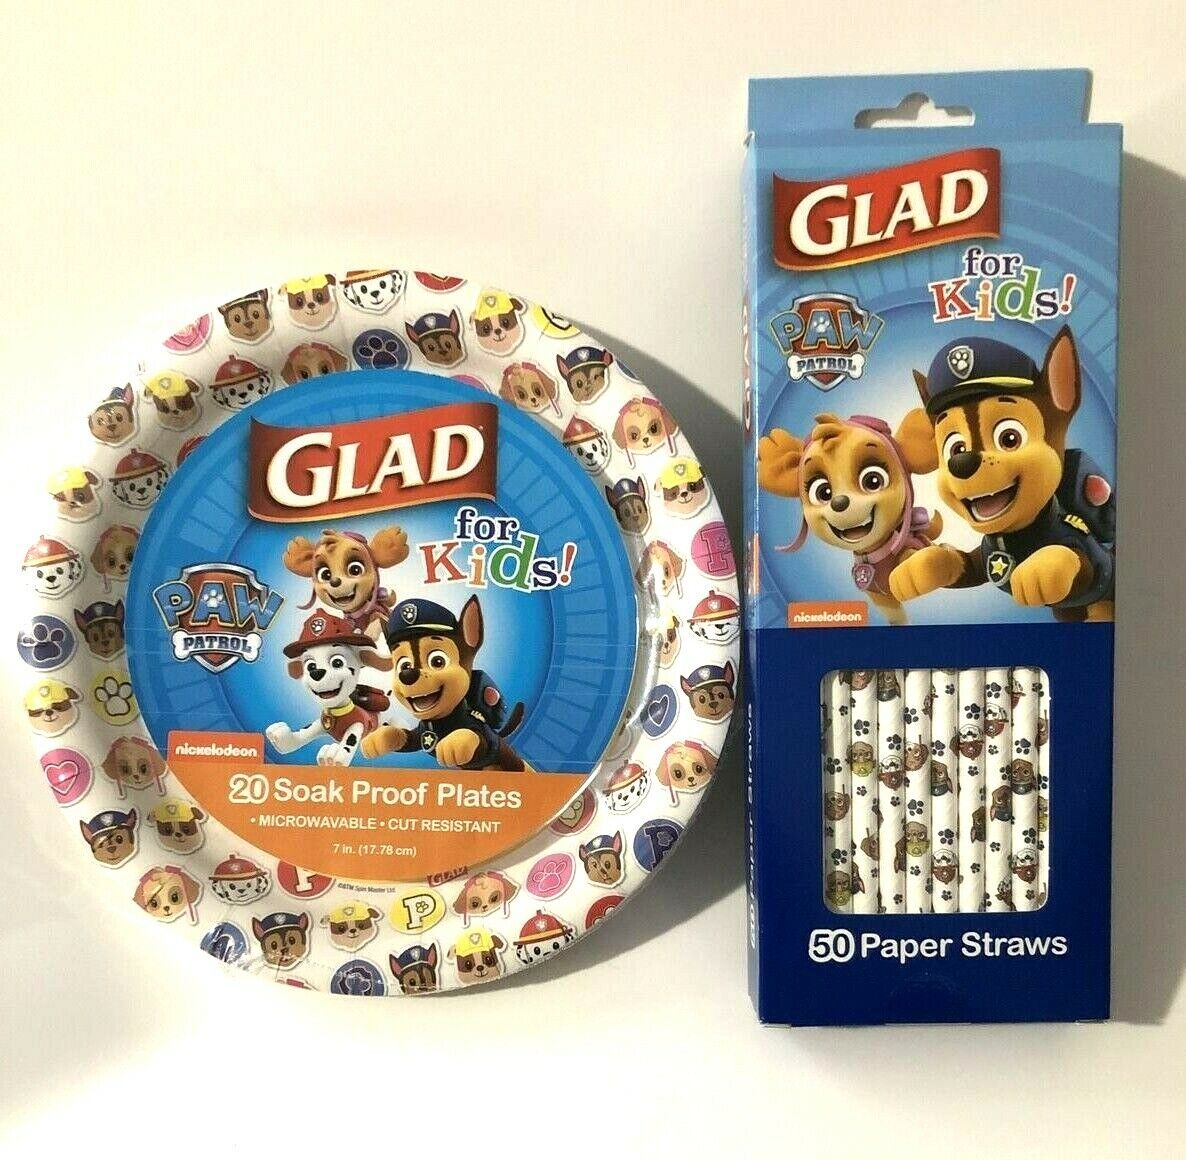 Glad For Kids Paw Patrol Paper Plates Microwave Safe 20 ct and Straws 50 ct GLAD